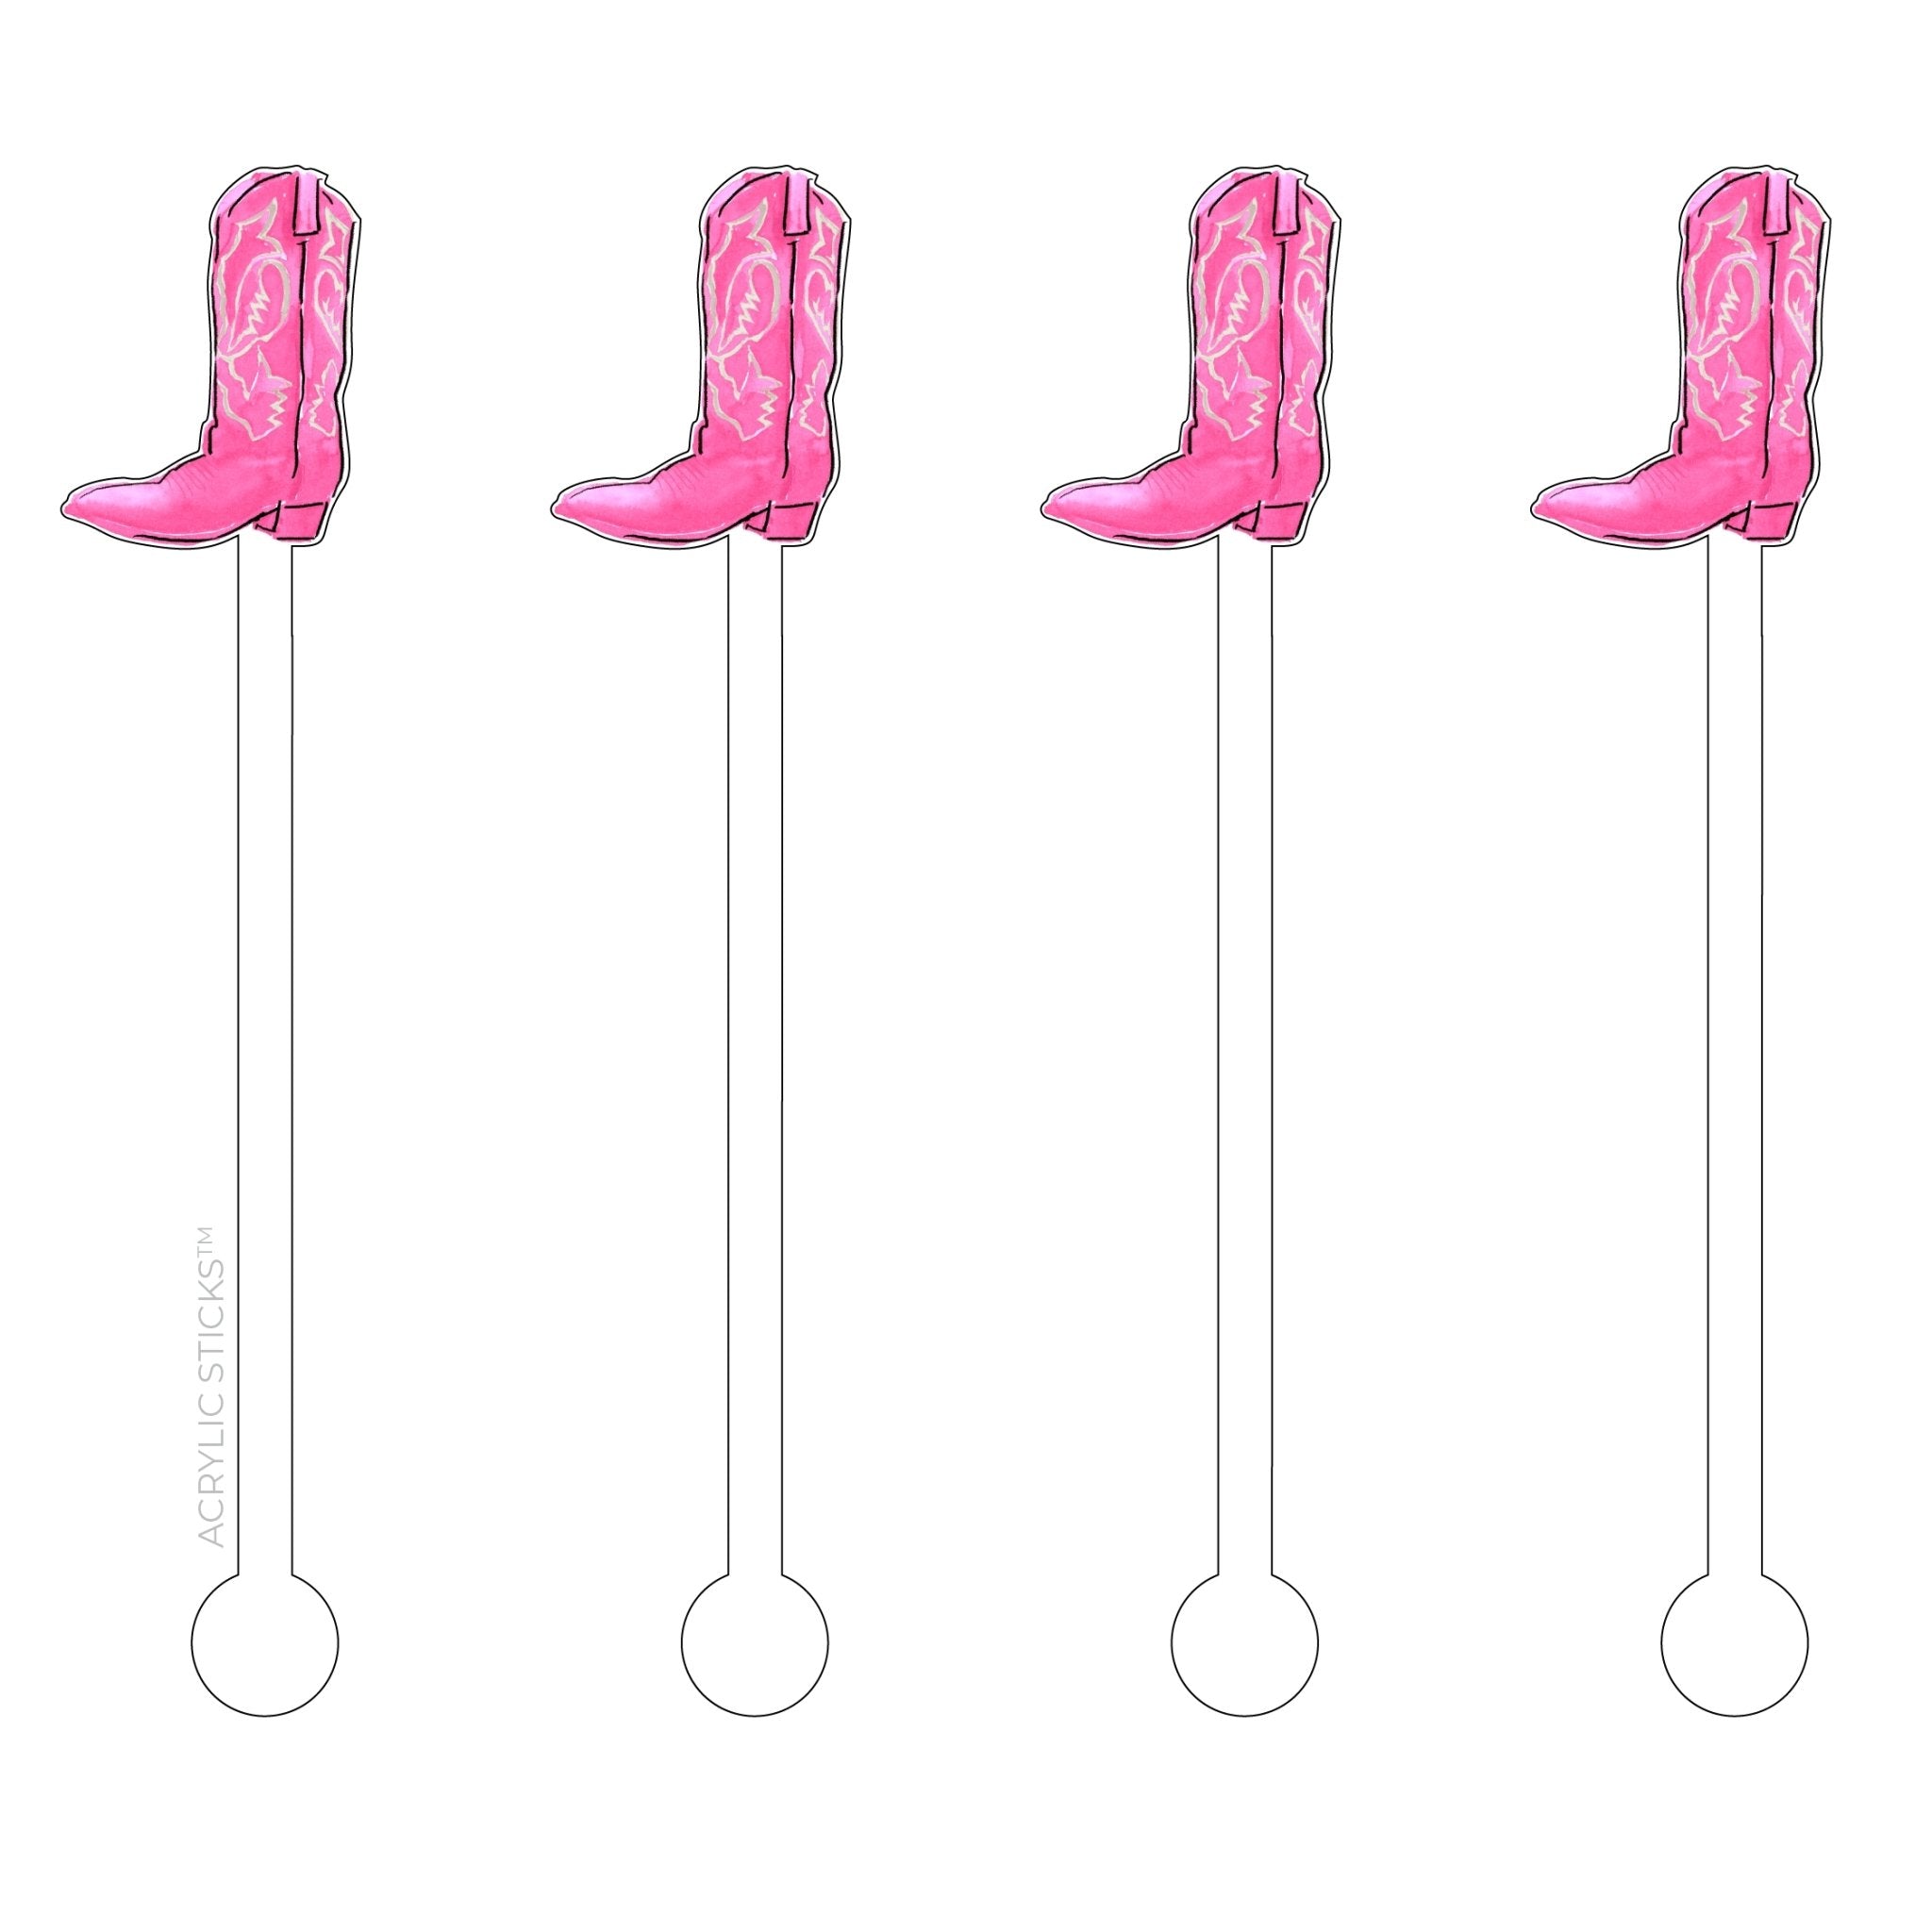 PRETTY IN PINK COWGIRL BOOT ACRYLIC STIR STICKS - Oh My Darling Party Co-Faire #Fringe_Backdrop#